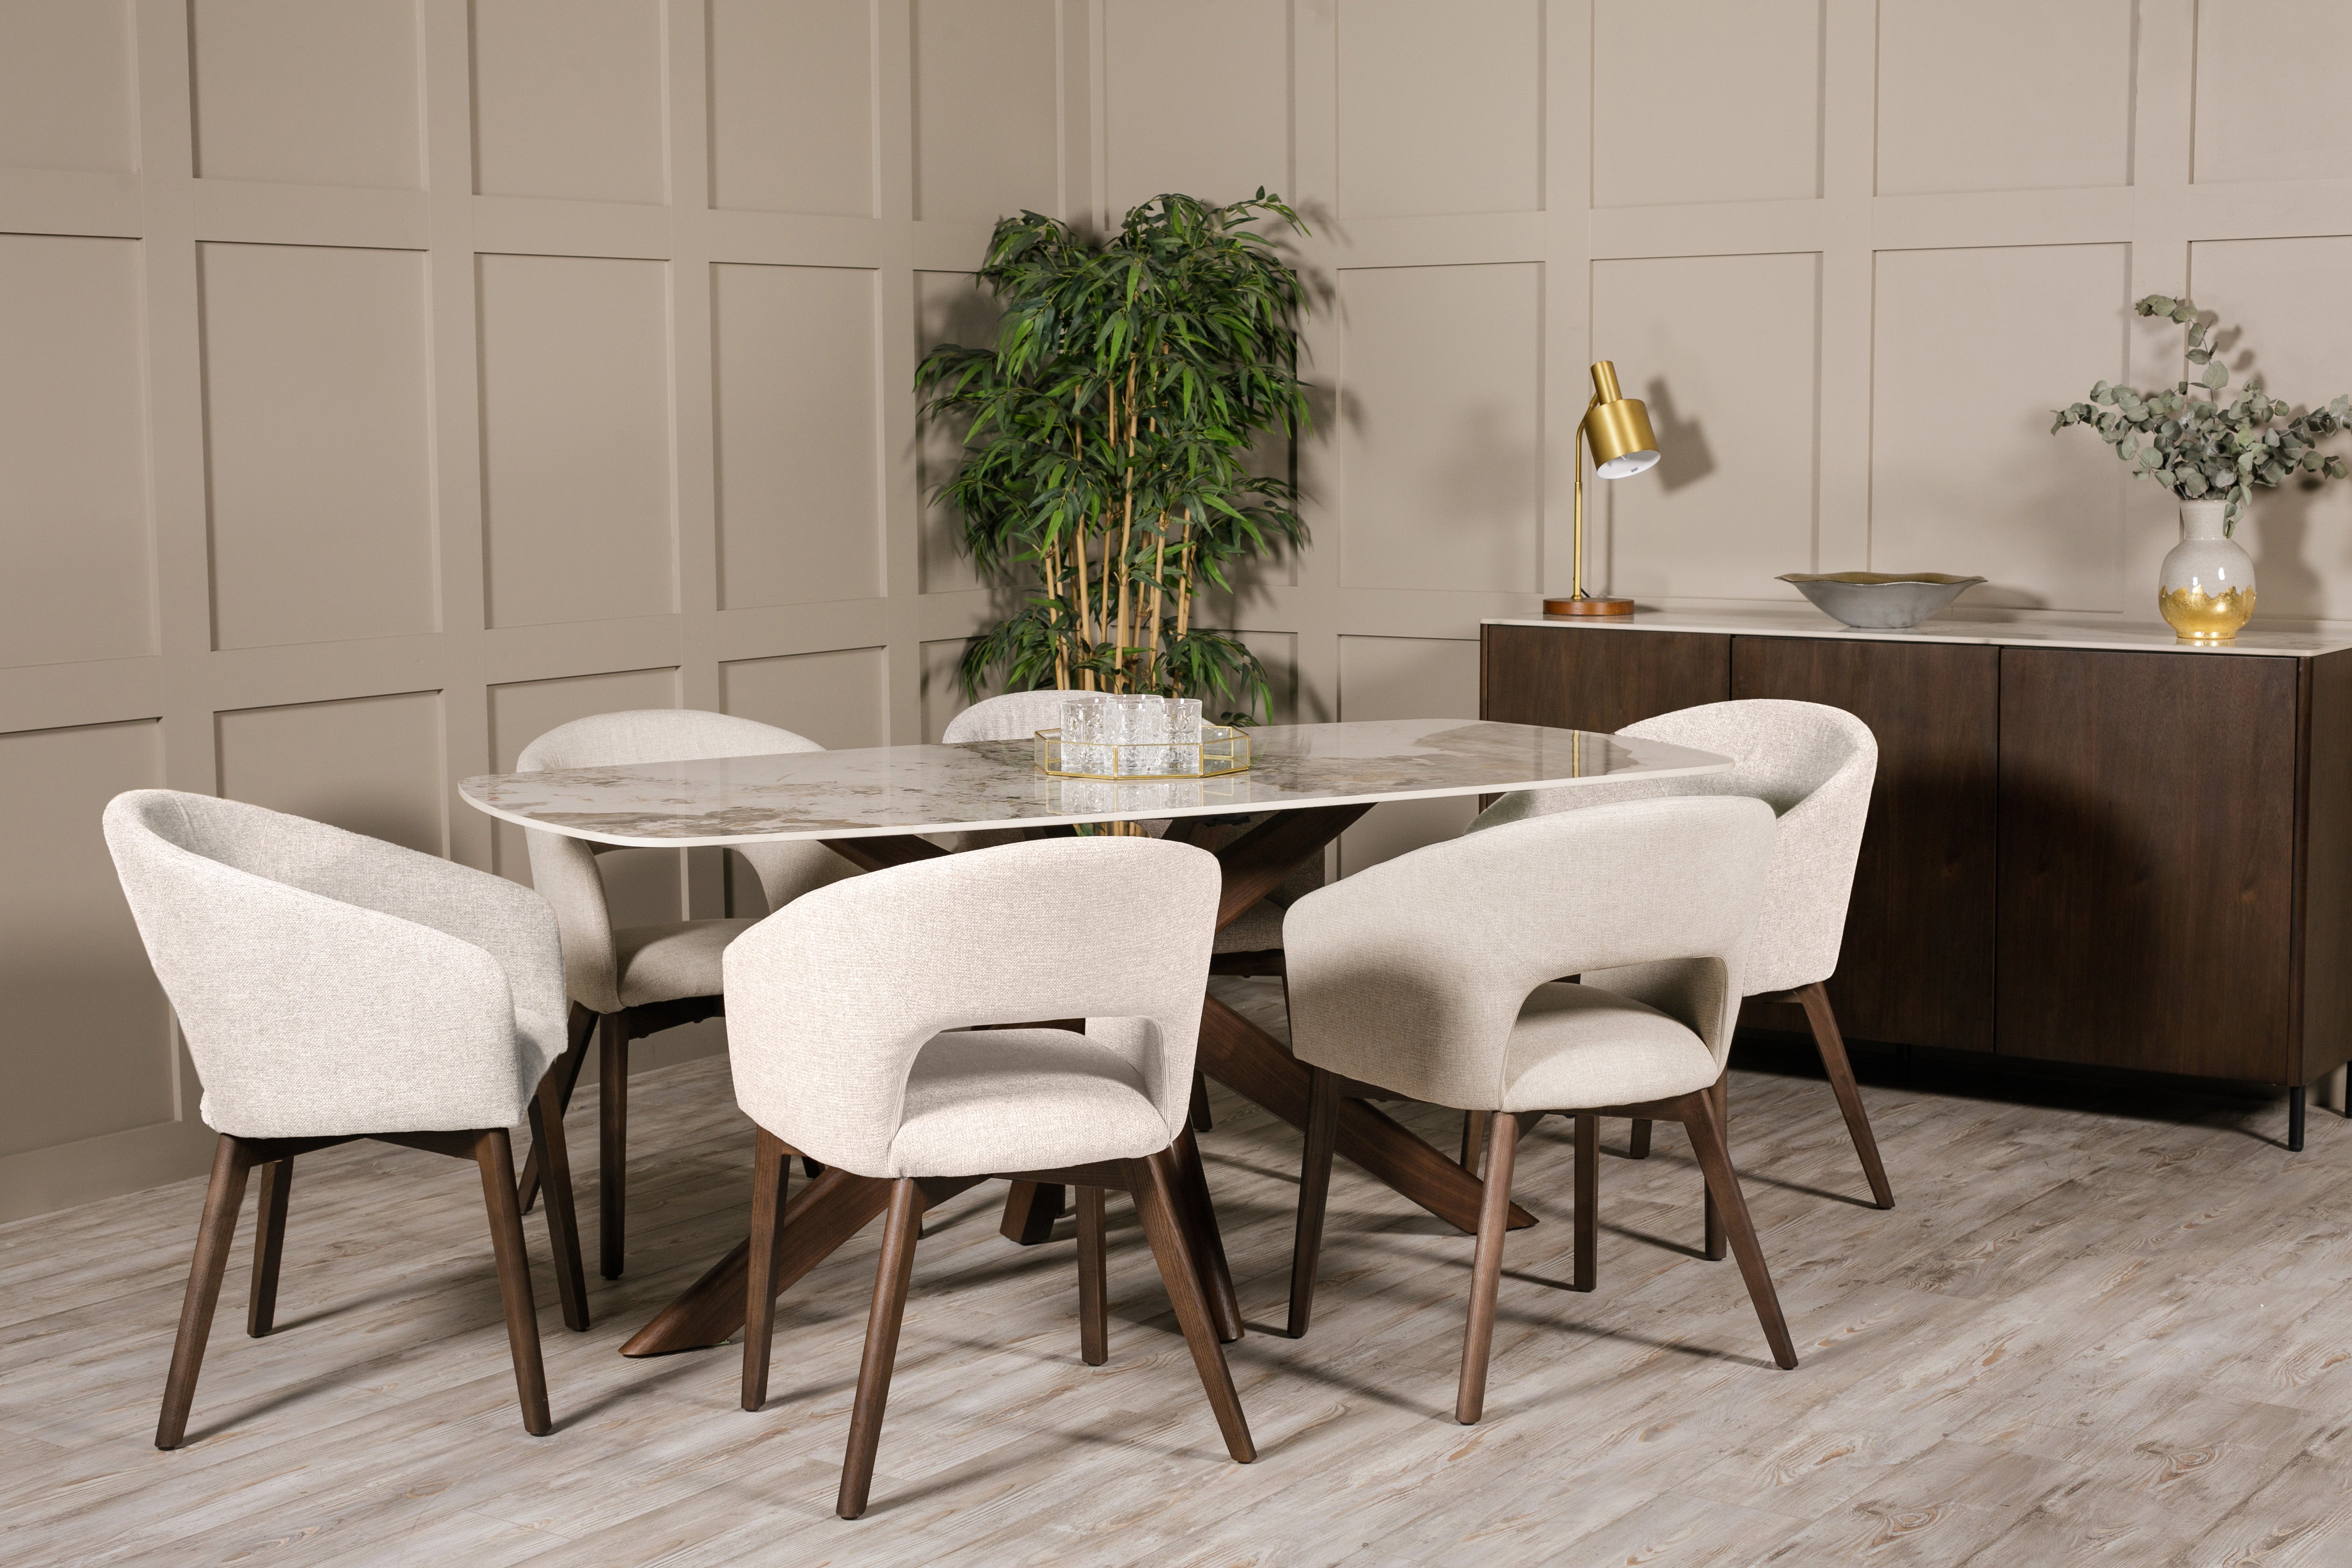 Everest Dining Chairs - Natural